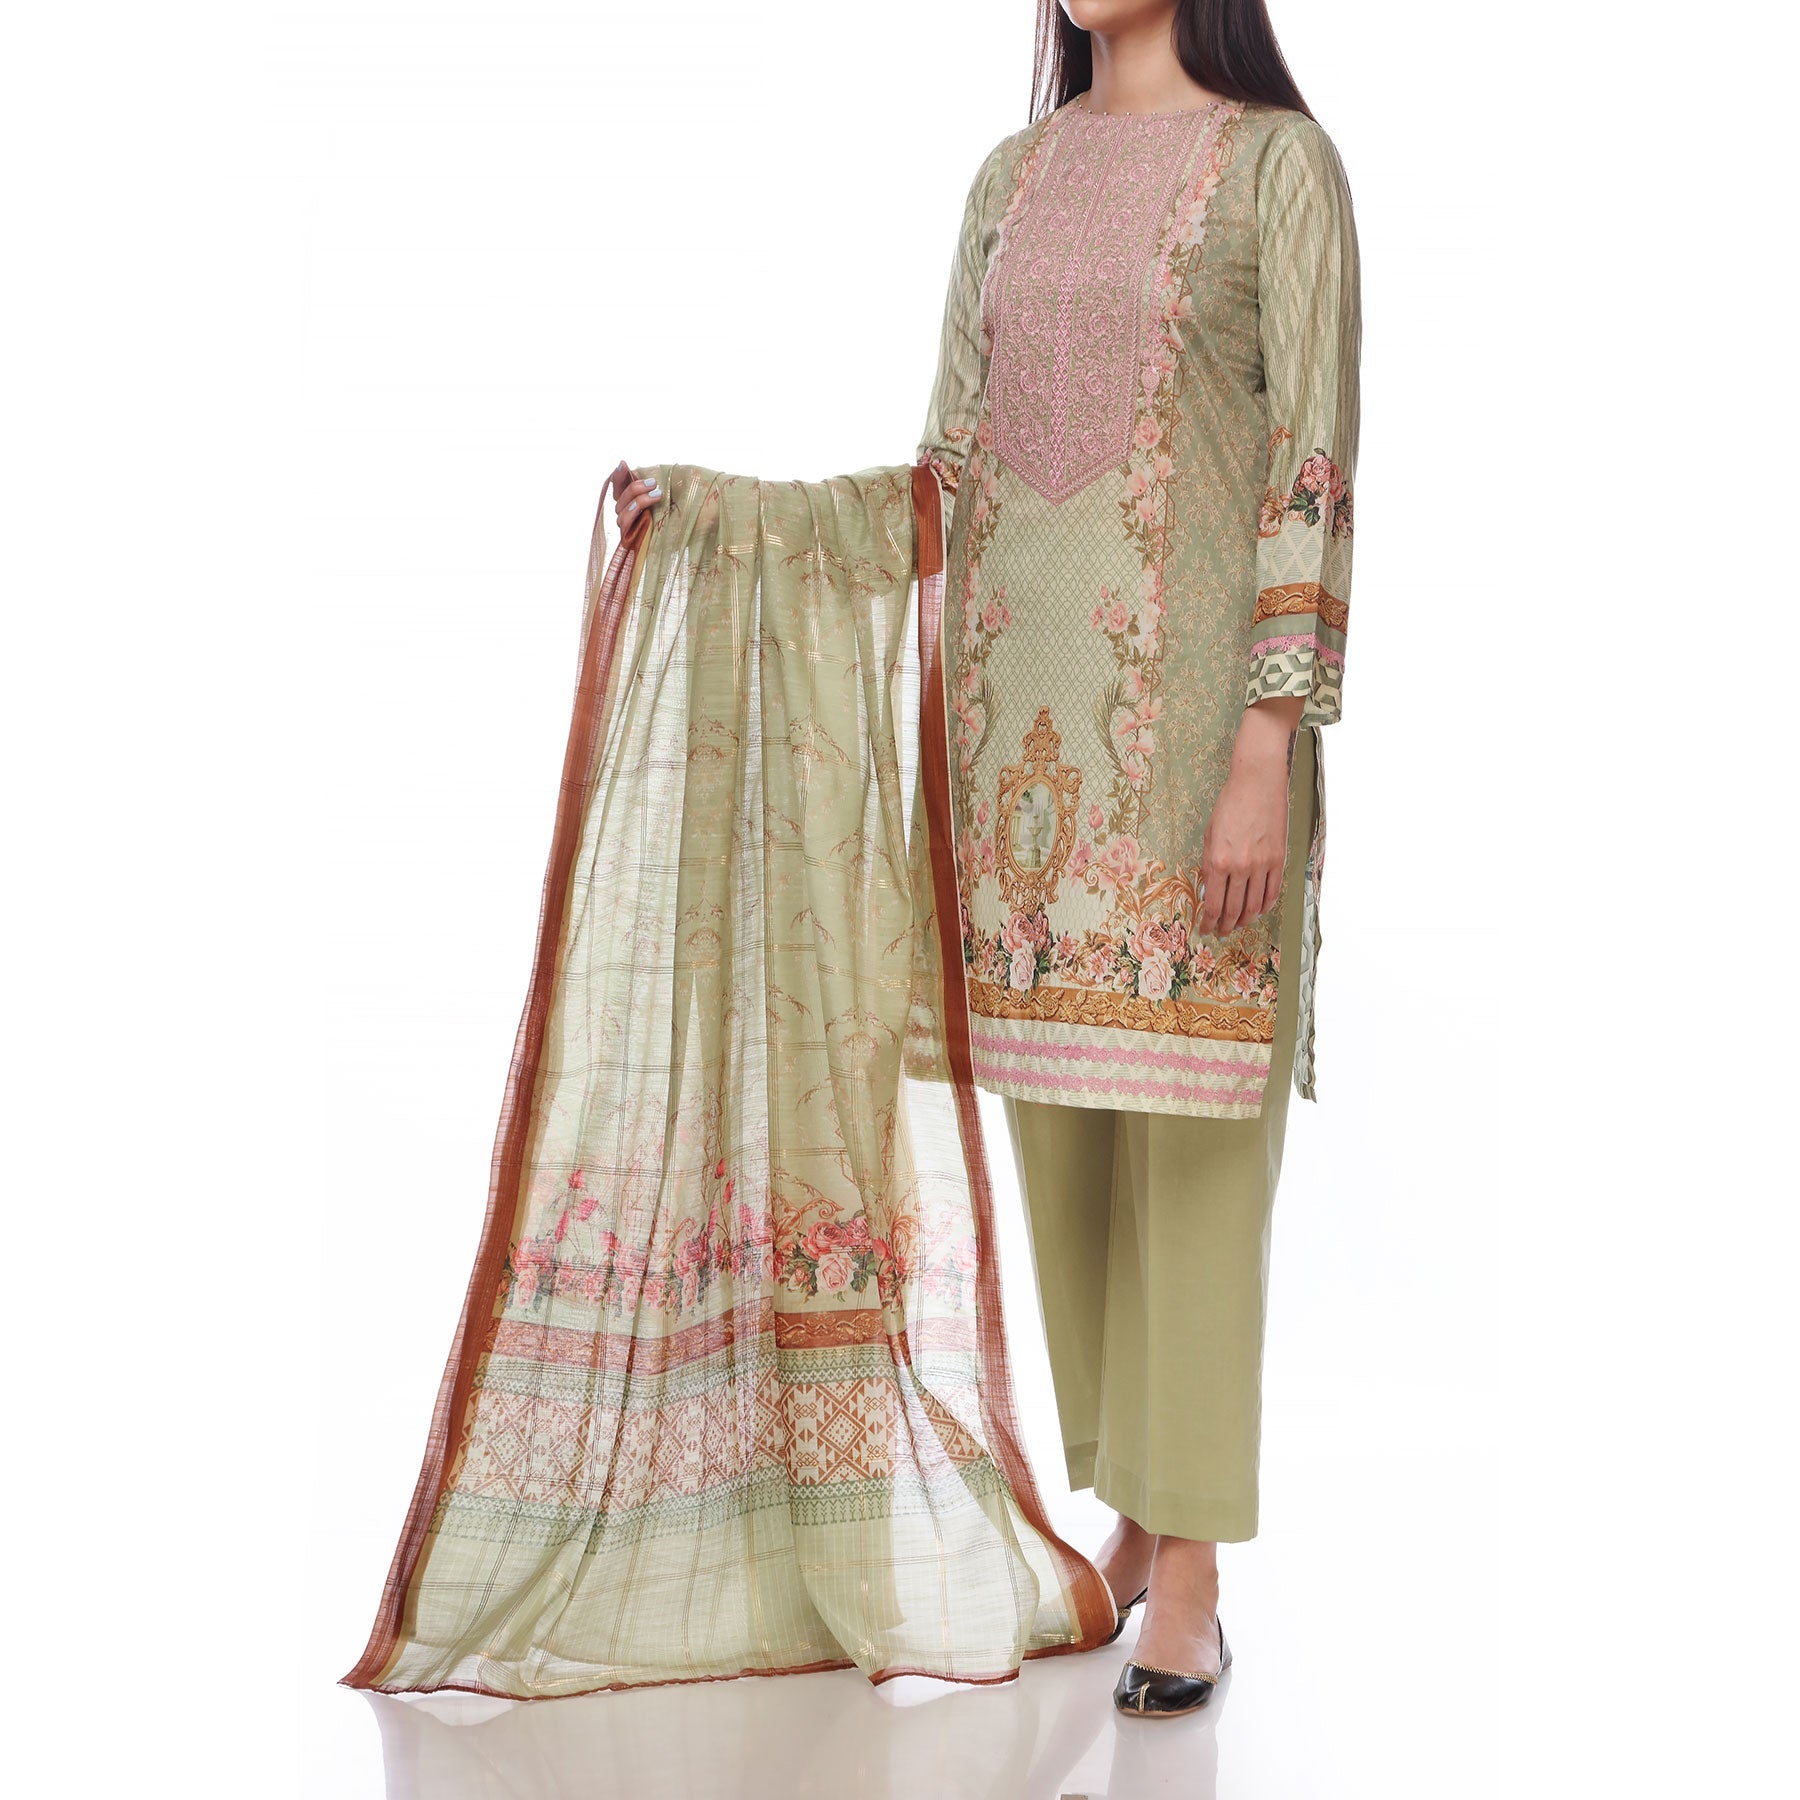 Digital Printed Lawn Shirt With Embroiderd Neck Line
Digtal Printed Tila Border Dupatta
Plain Dyed Cambric Trousers